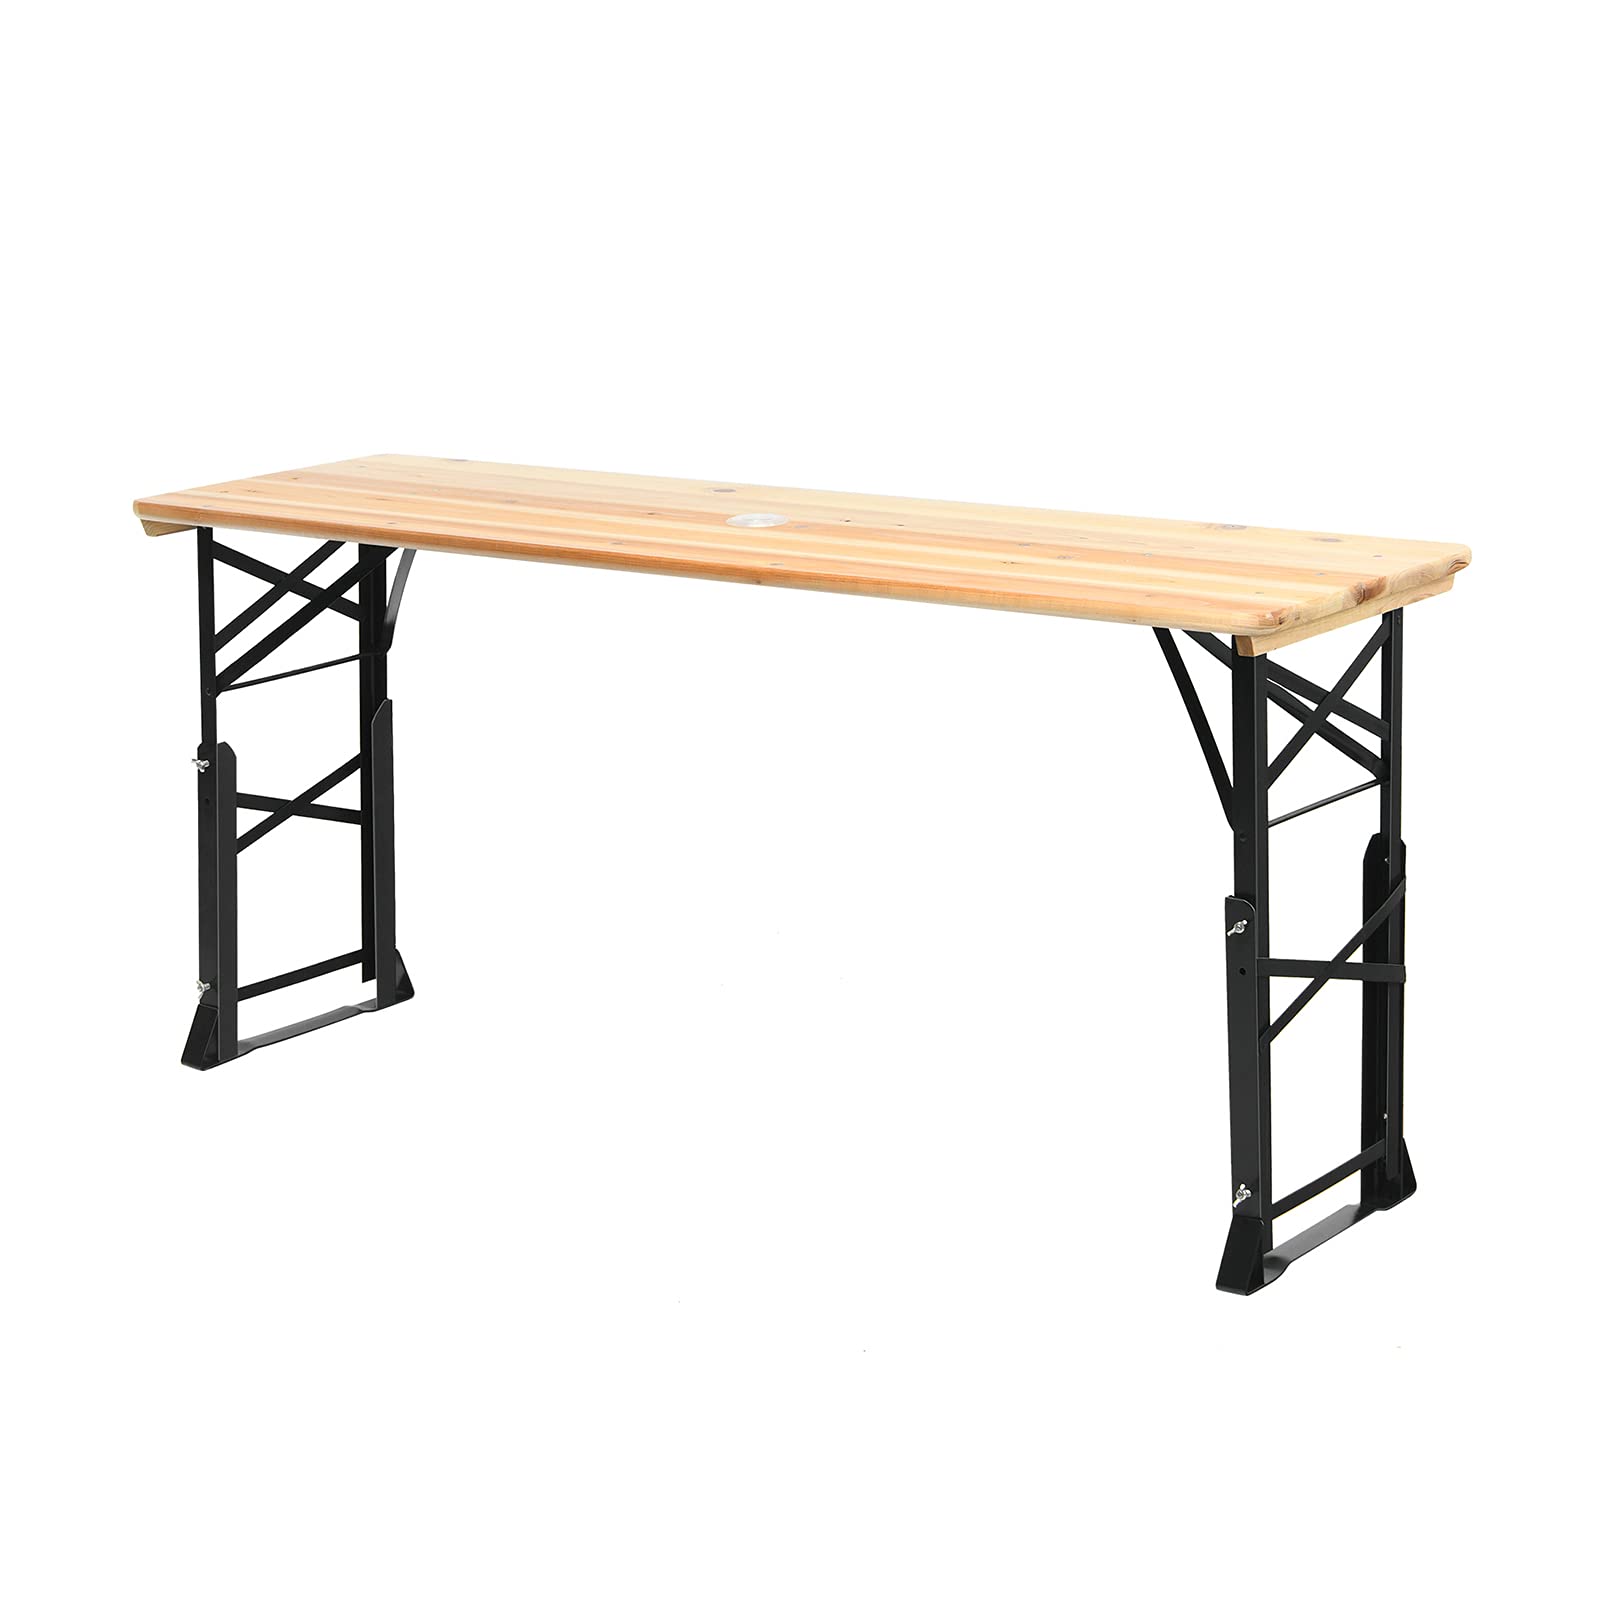 Giantex Folding Picnic Table, Wood Outdoor Table with Umbrella Hole